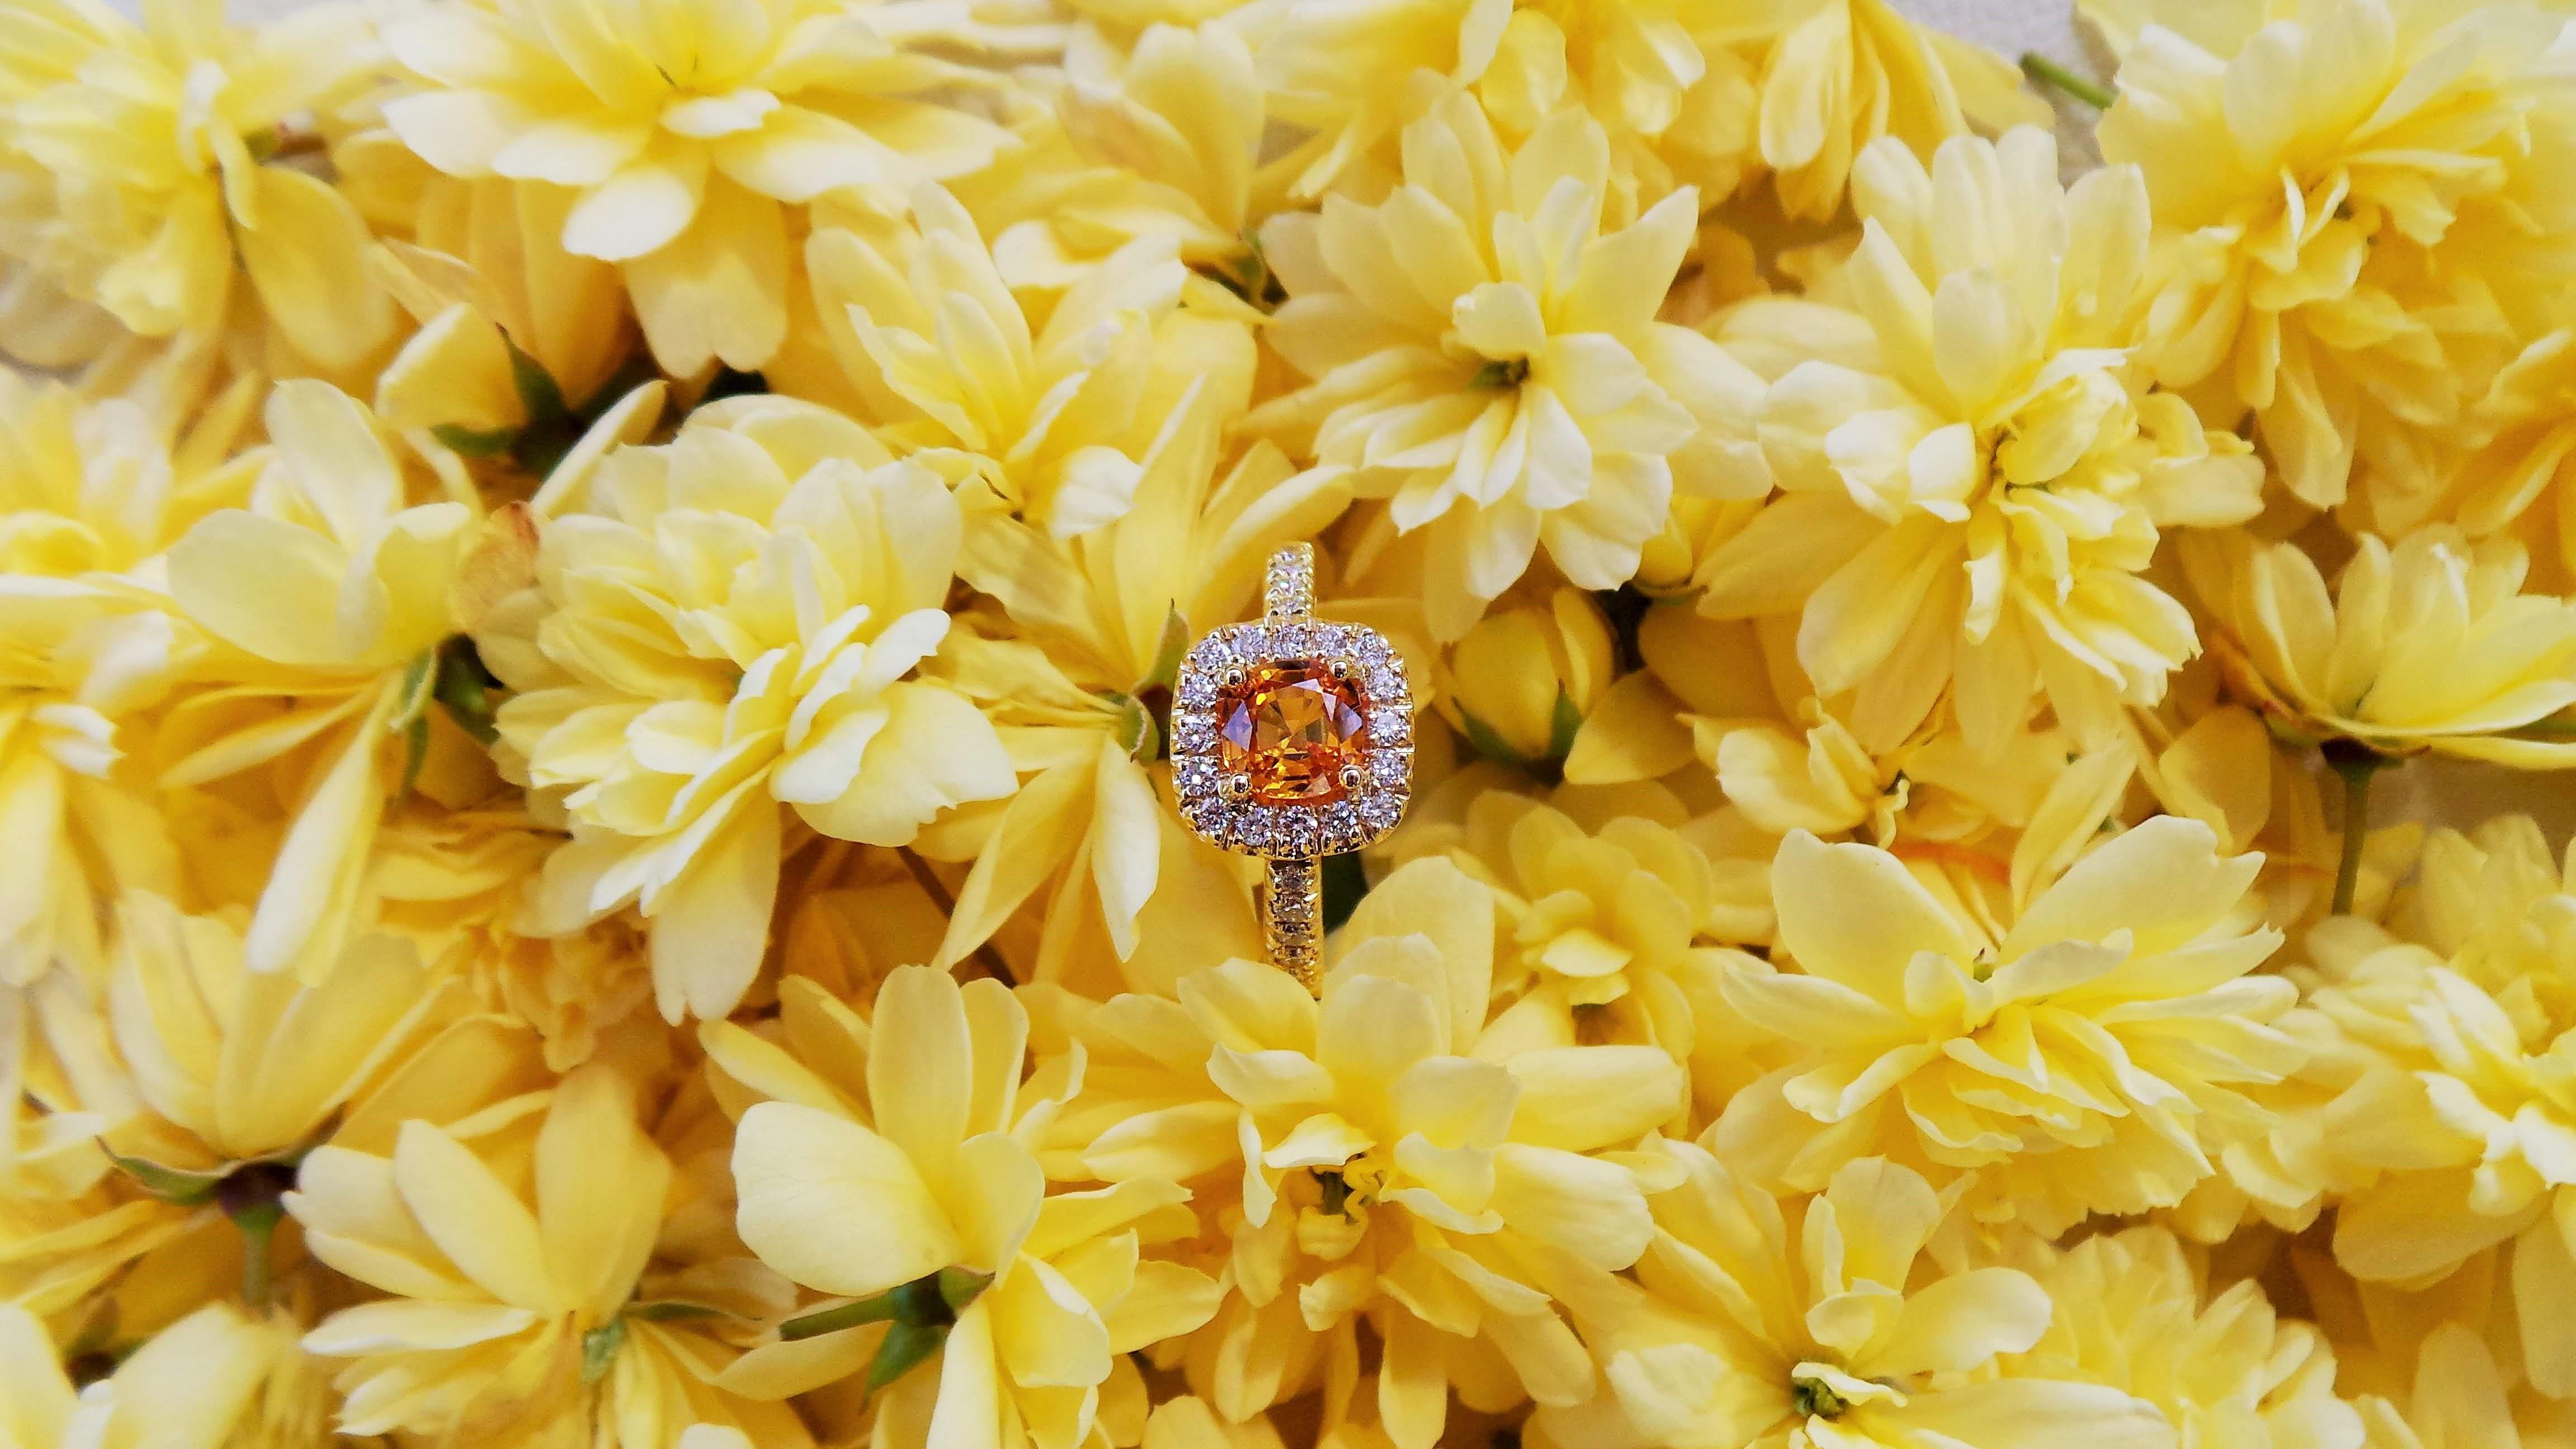 Andrea Macinai design a dedicated collection for engament rings  with a beautiful yellow square sapphire and diamonds.
Designed and built the ring following the natural line of the stone
0.83 carat square yellow sapphire complimented by 26 round